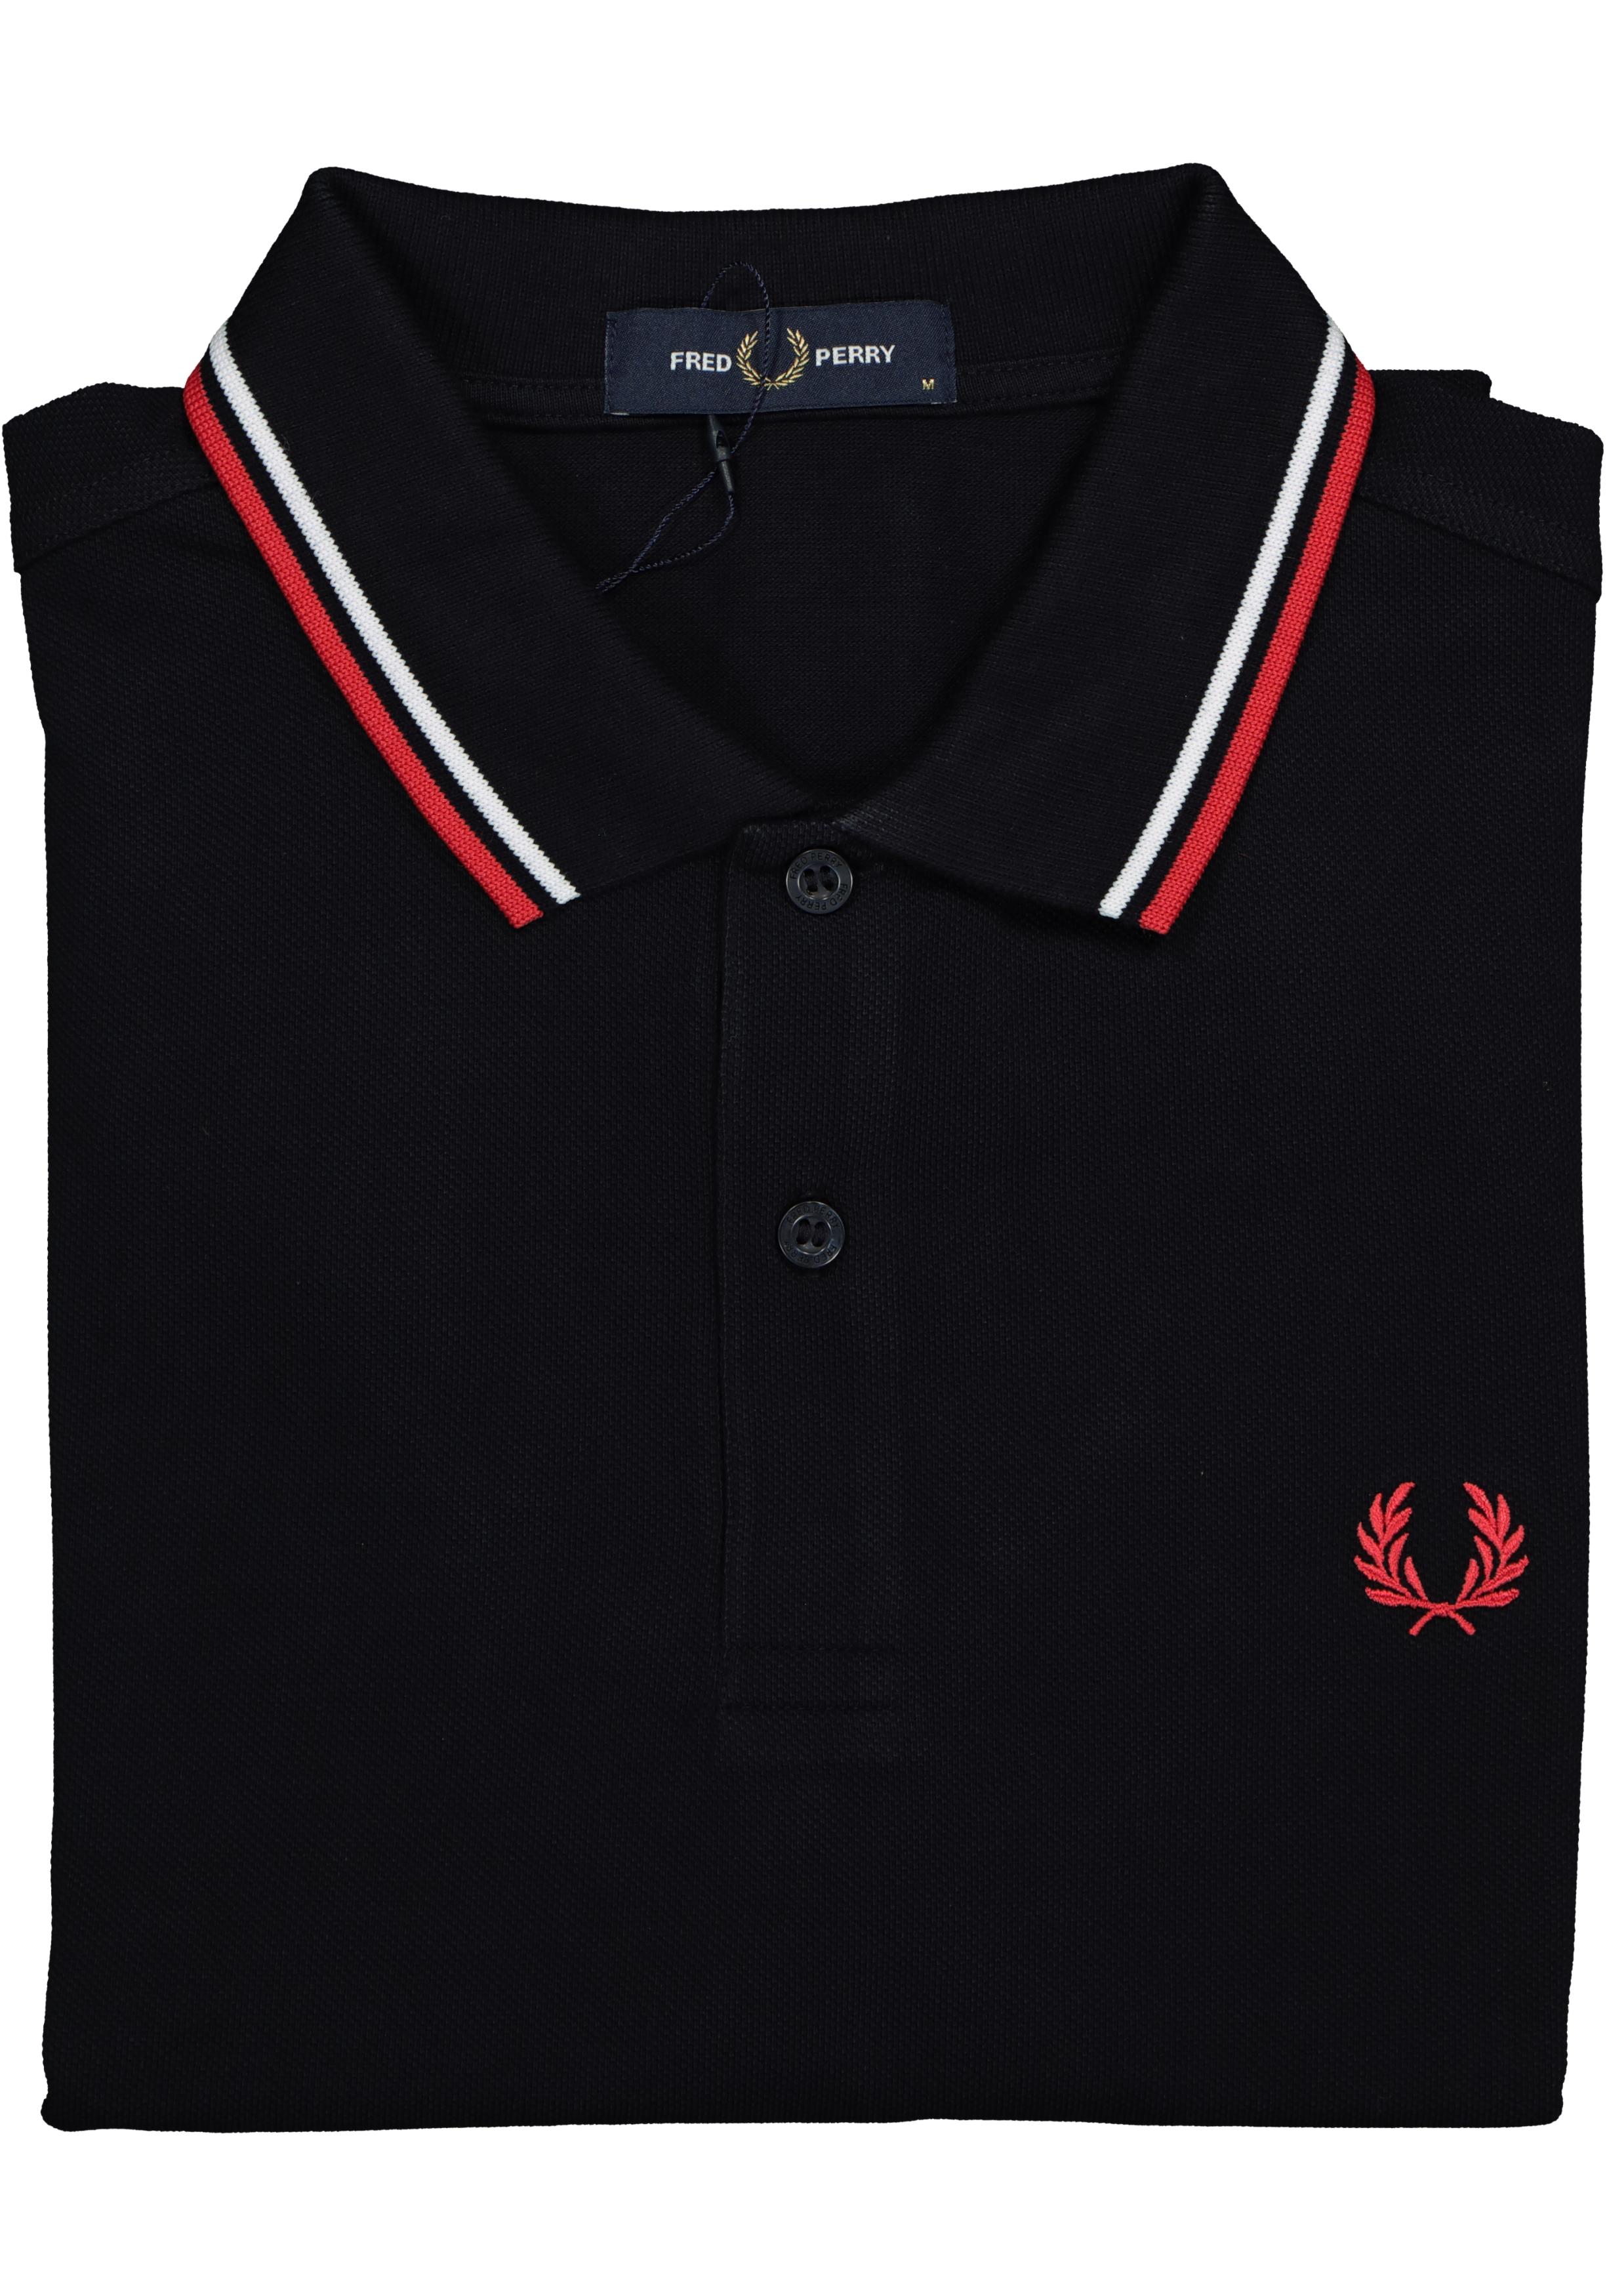 Feest Lief Klassiek Fred Perry M3600 polo twin tipped shirt, heren polo Navy / White / Red -  Zomer SALE tot 50% korting